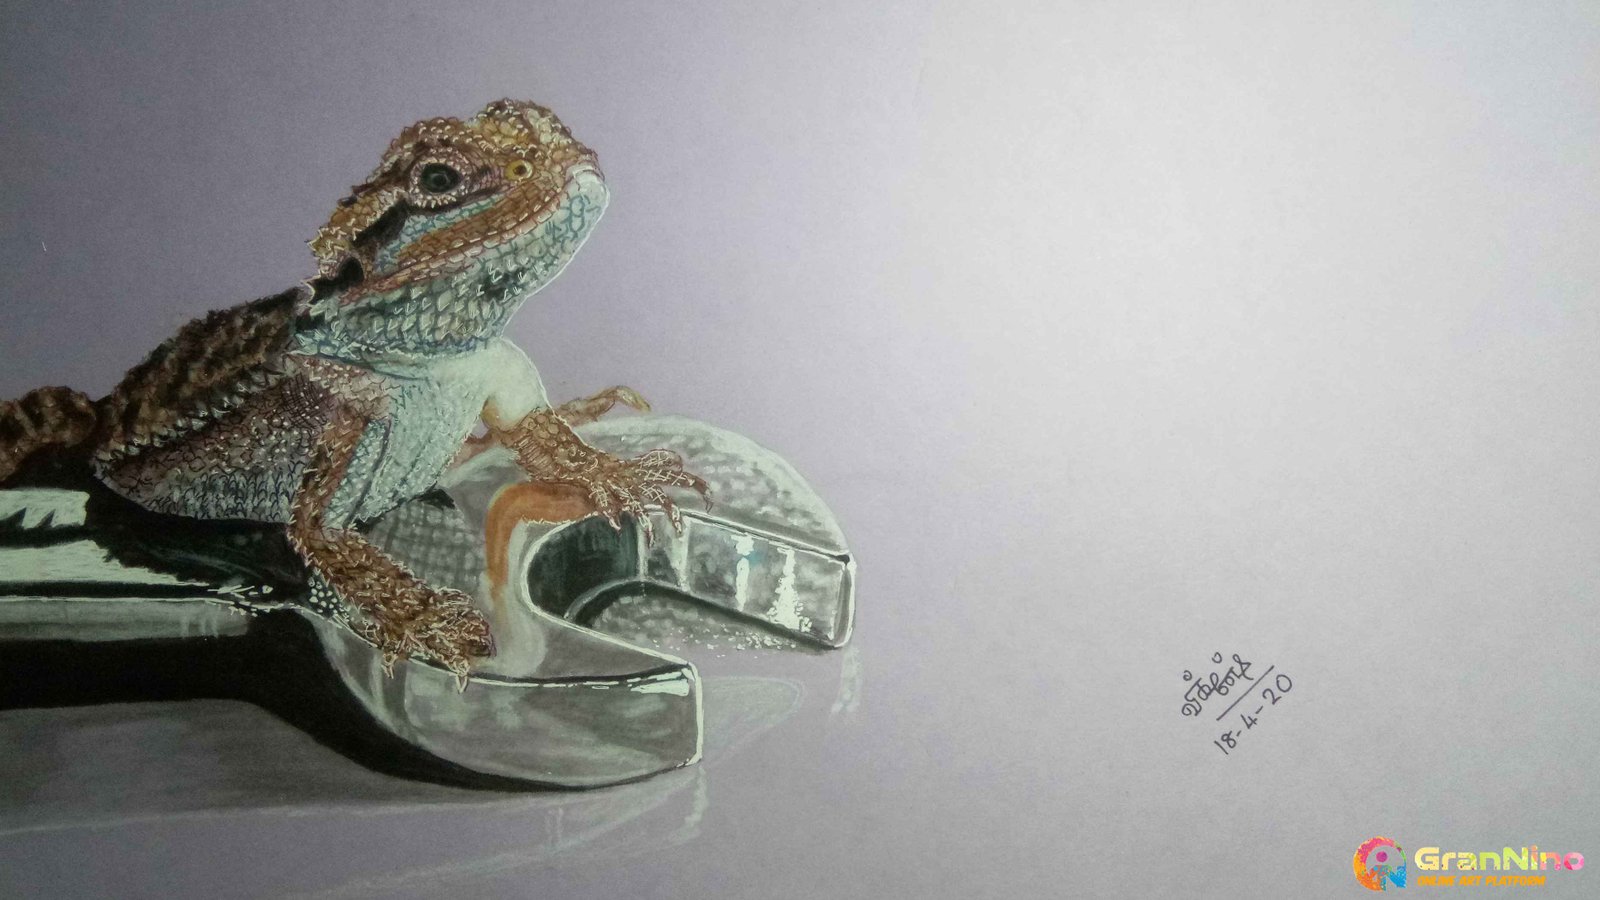 Realistic Drawing Of Lizard How To Draw A Realistic Lizard